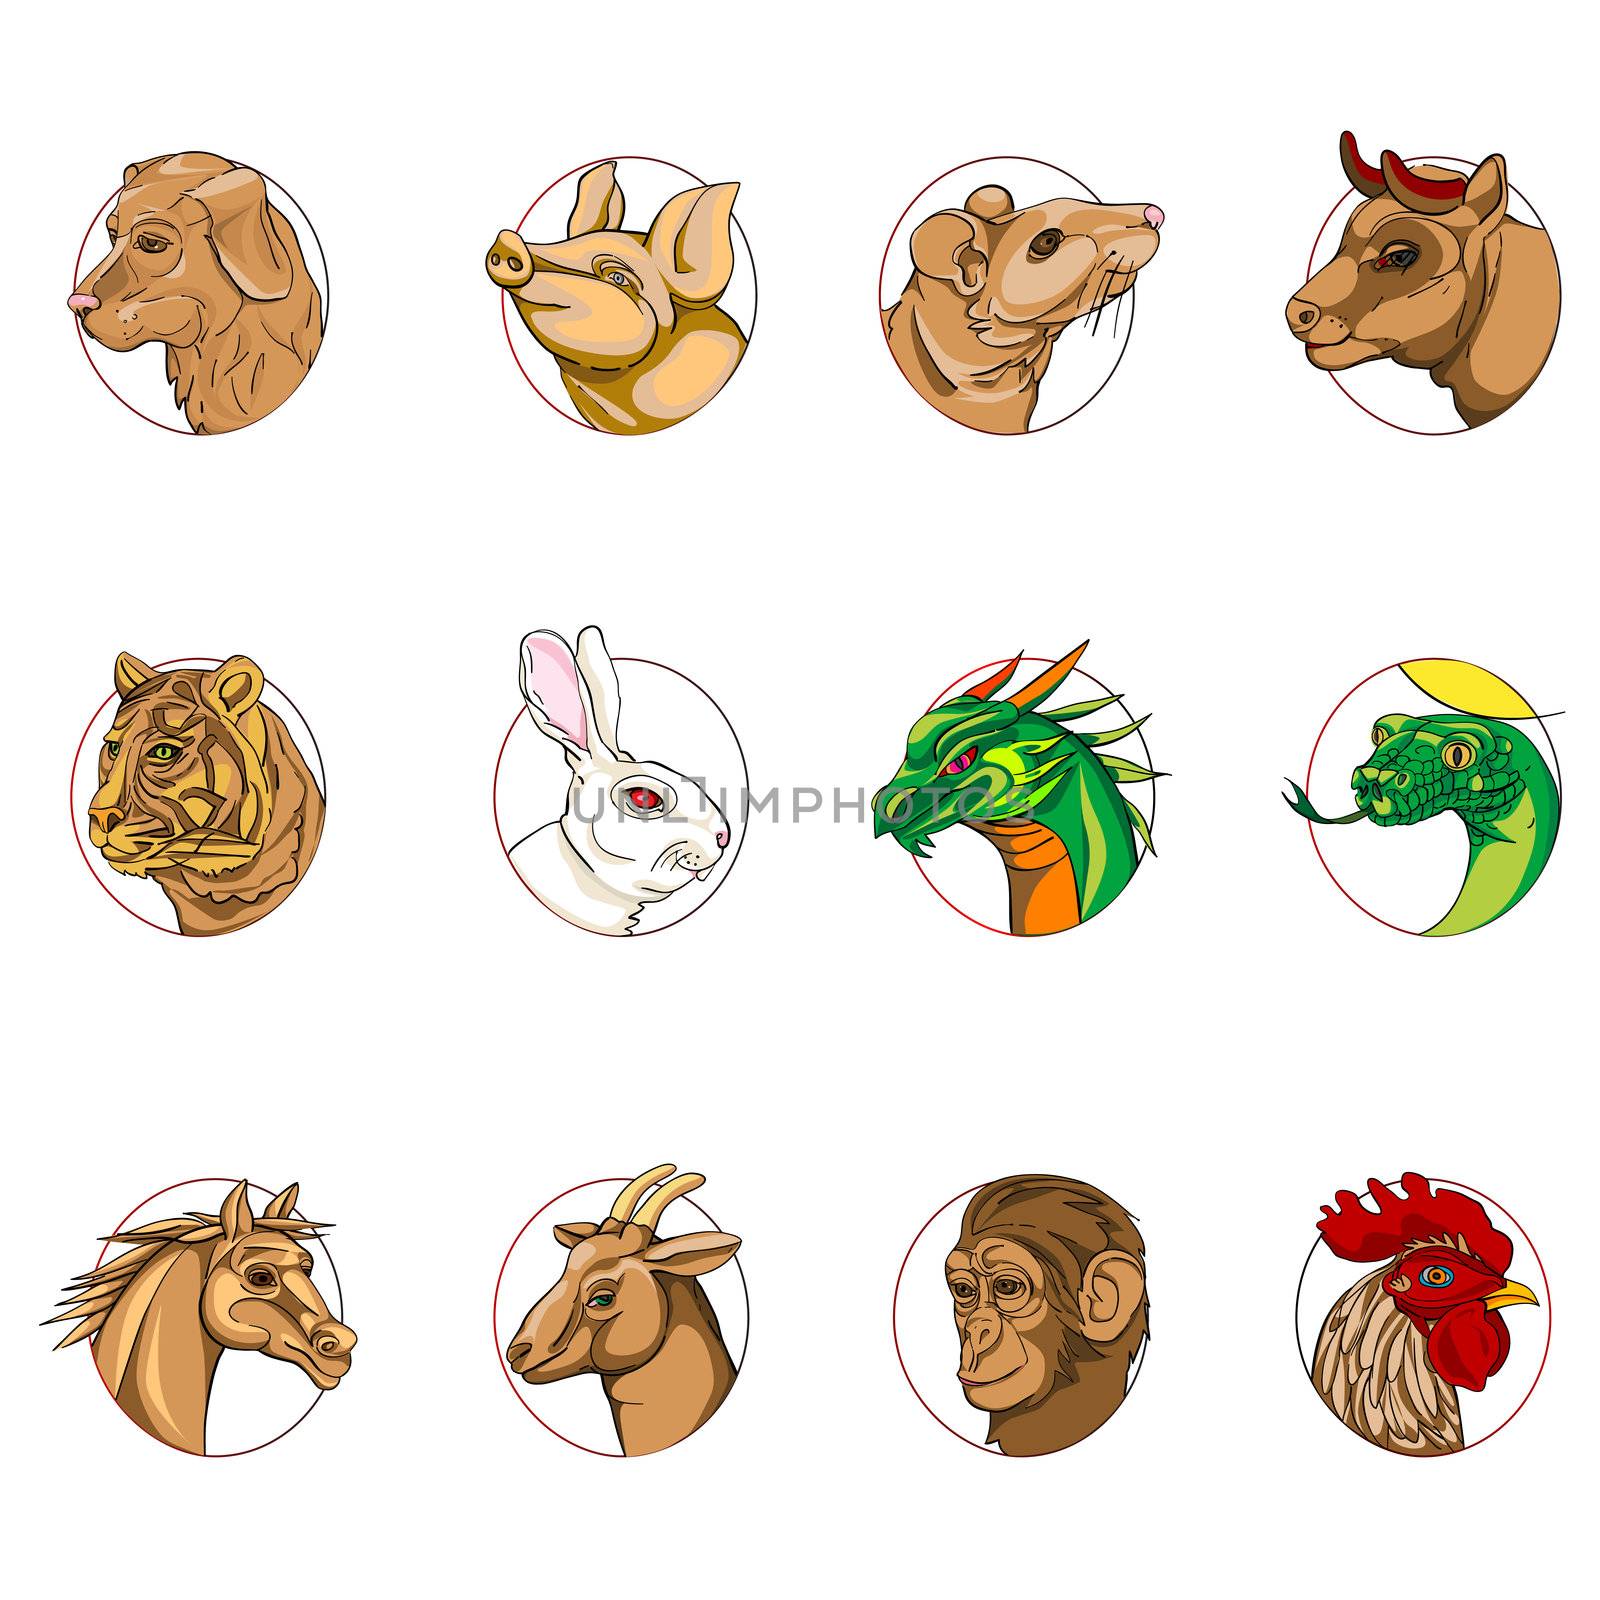 12 animals portraits, chinese zodiac signs collection isolated on white